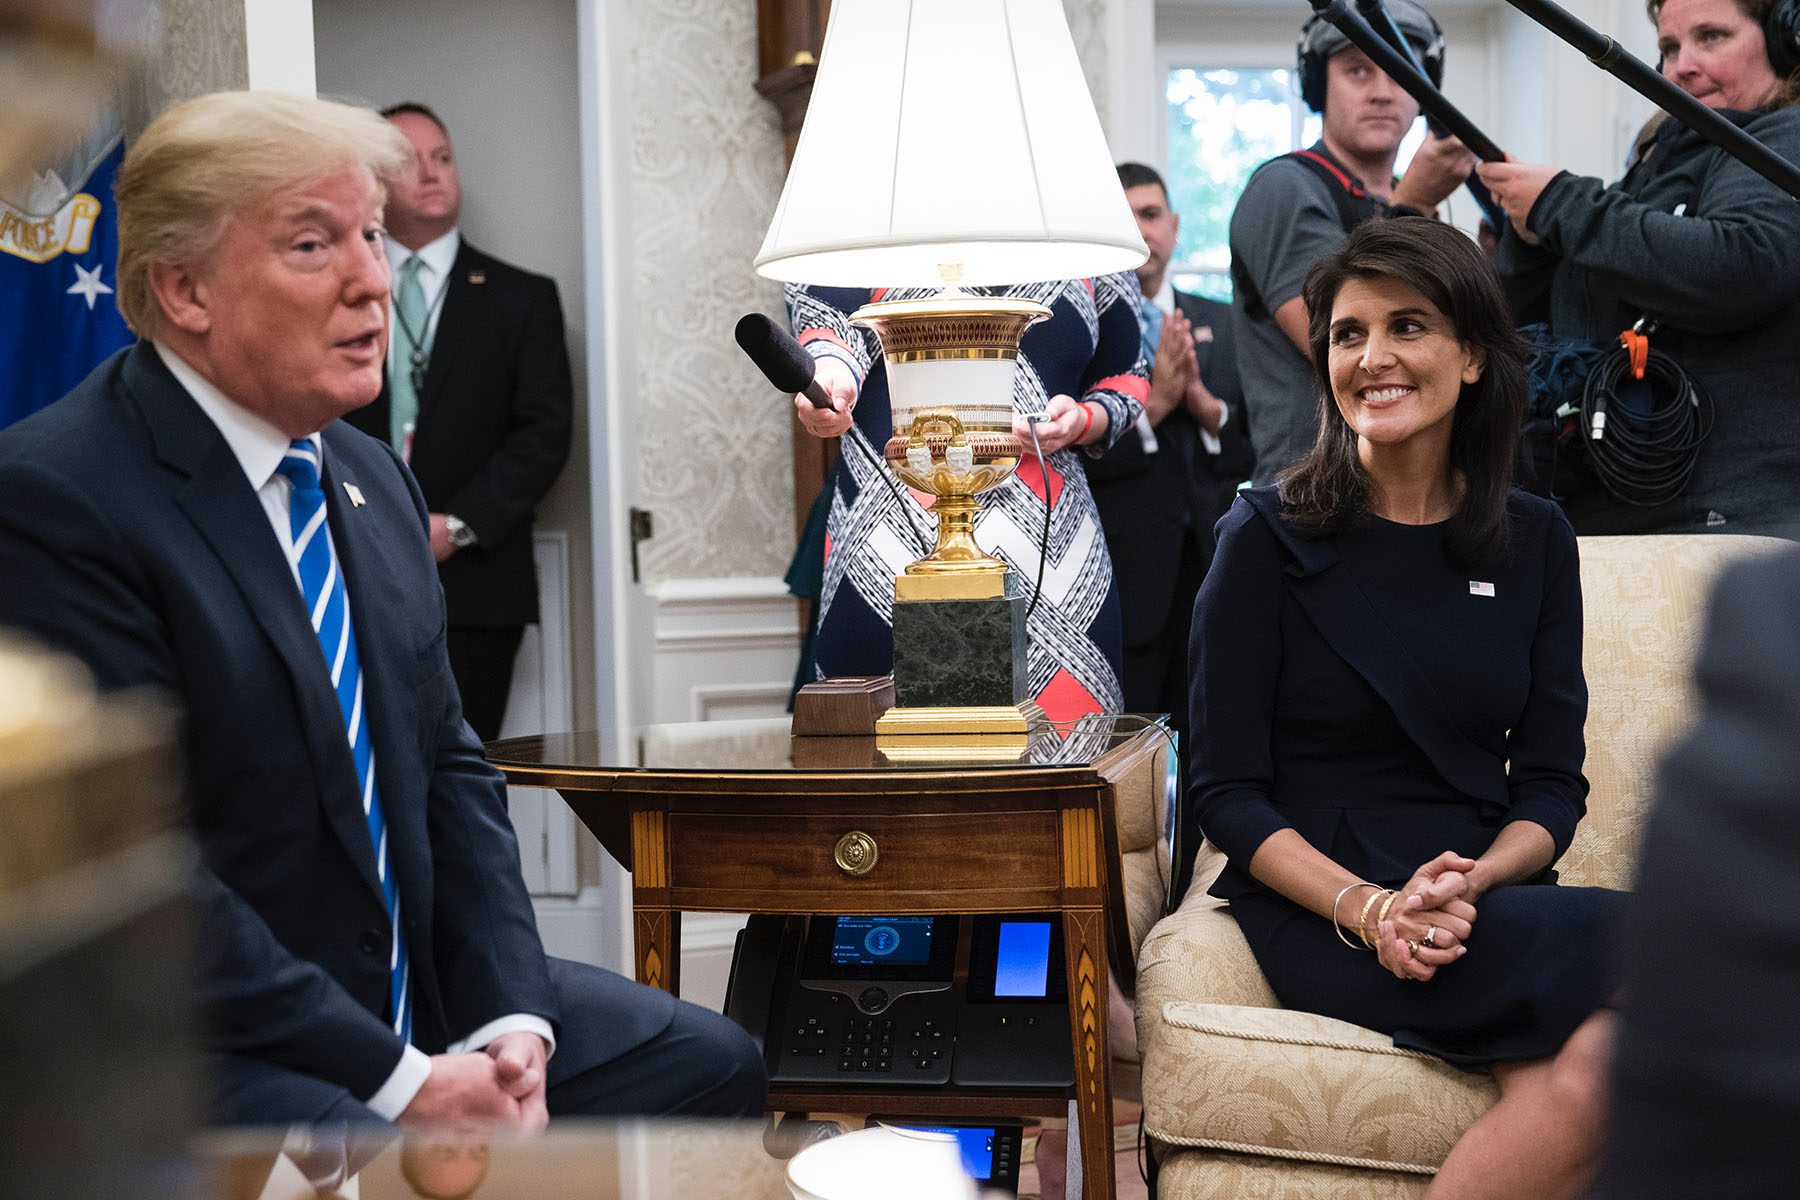 Nikki Haley listens as President Trump speaks during a meeting in the Oval Office of the White House.